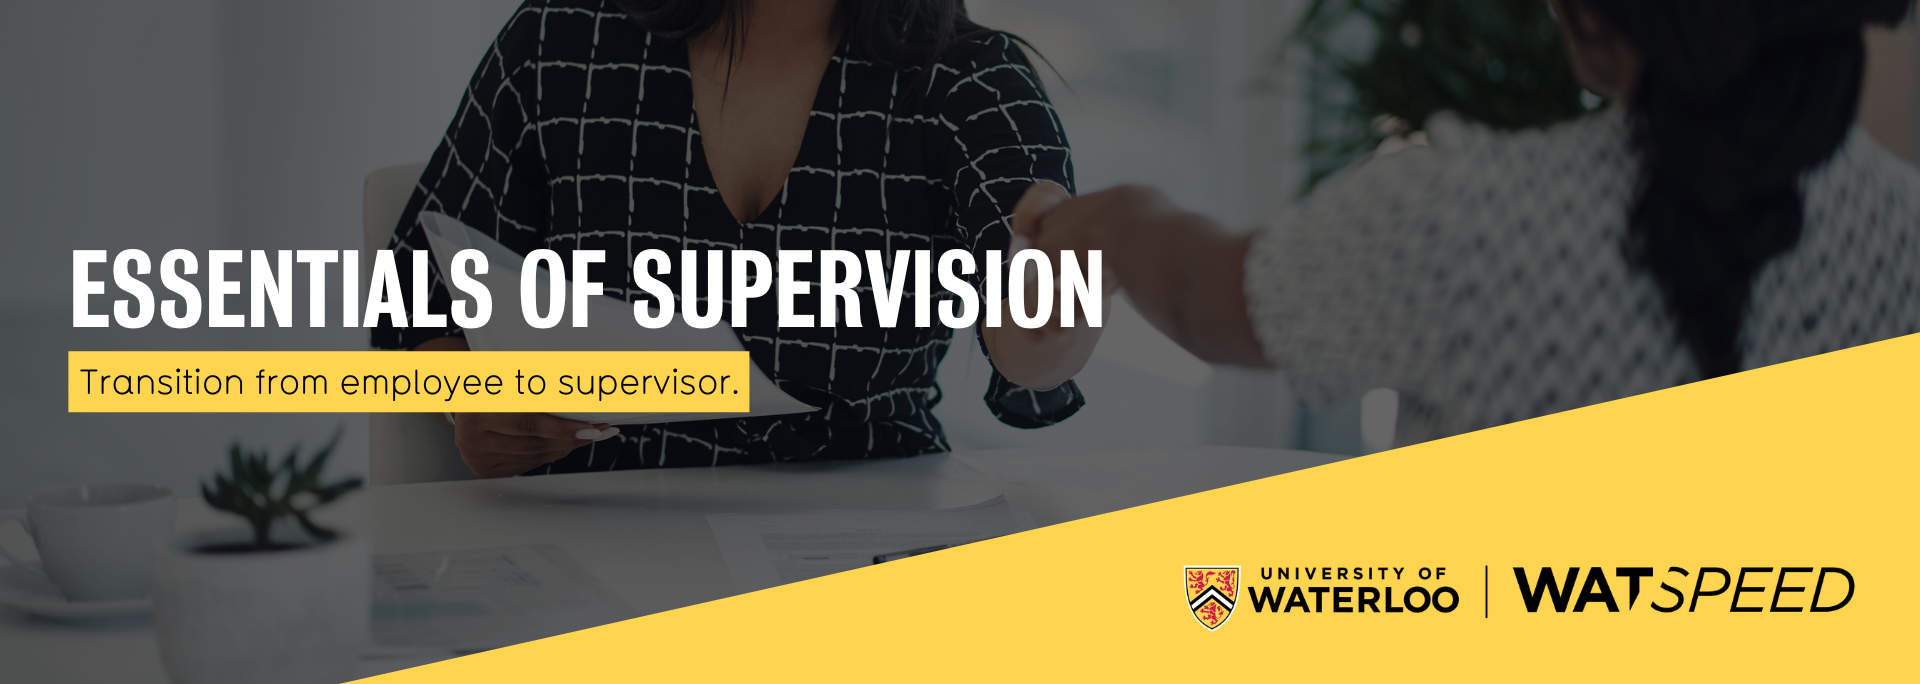 Essentials of Supervision. Enhance your capabilities. Get to know your team with us.